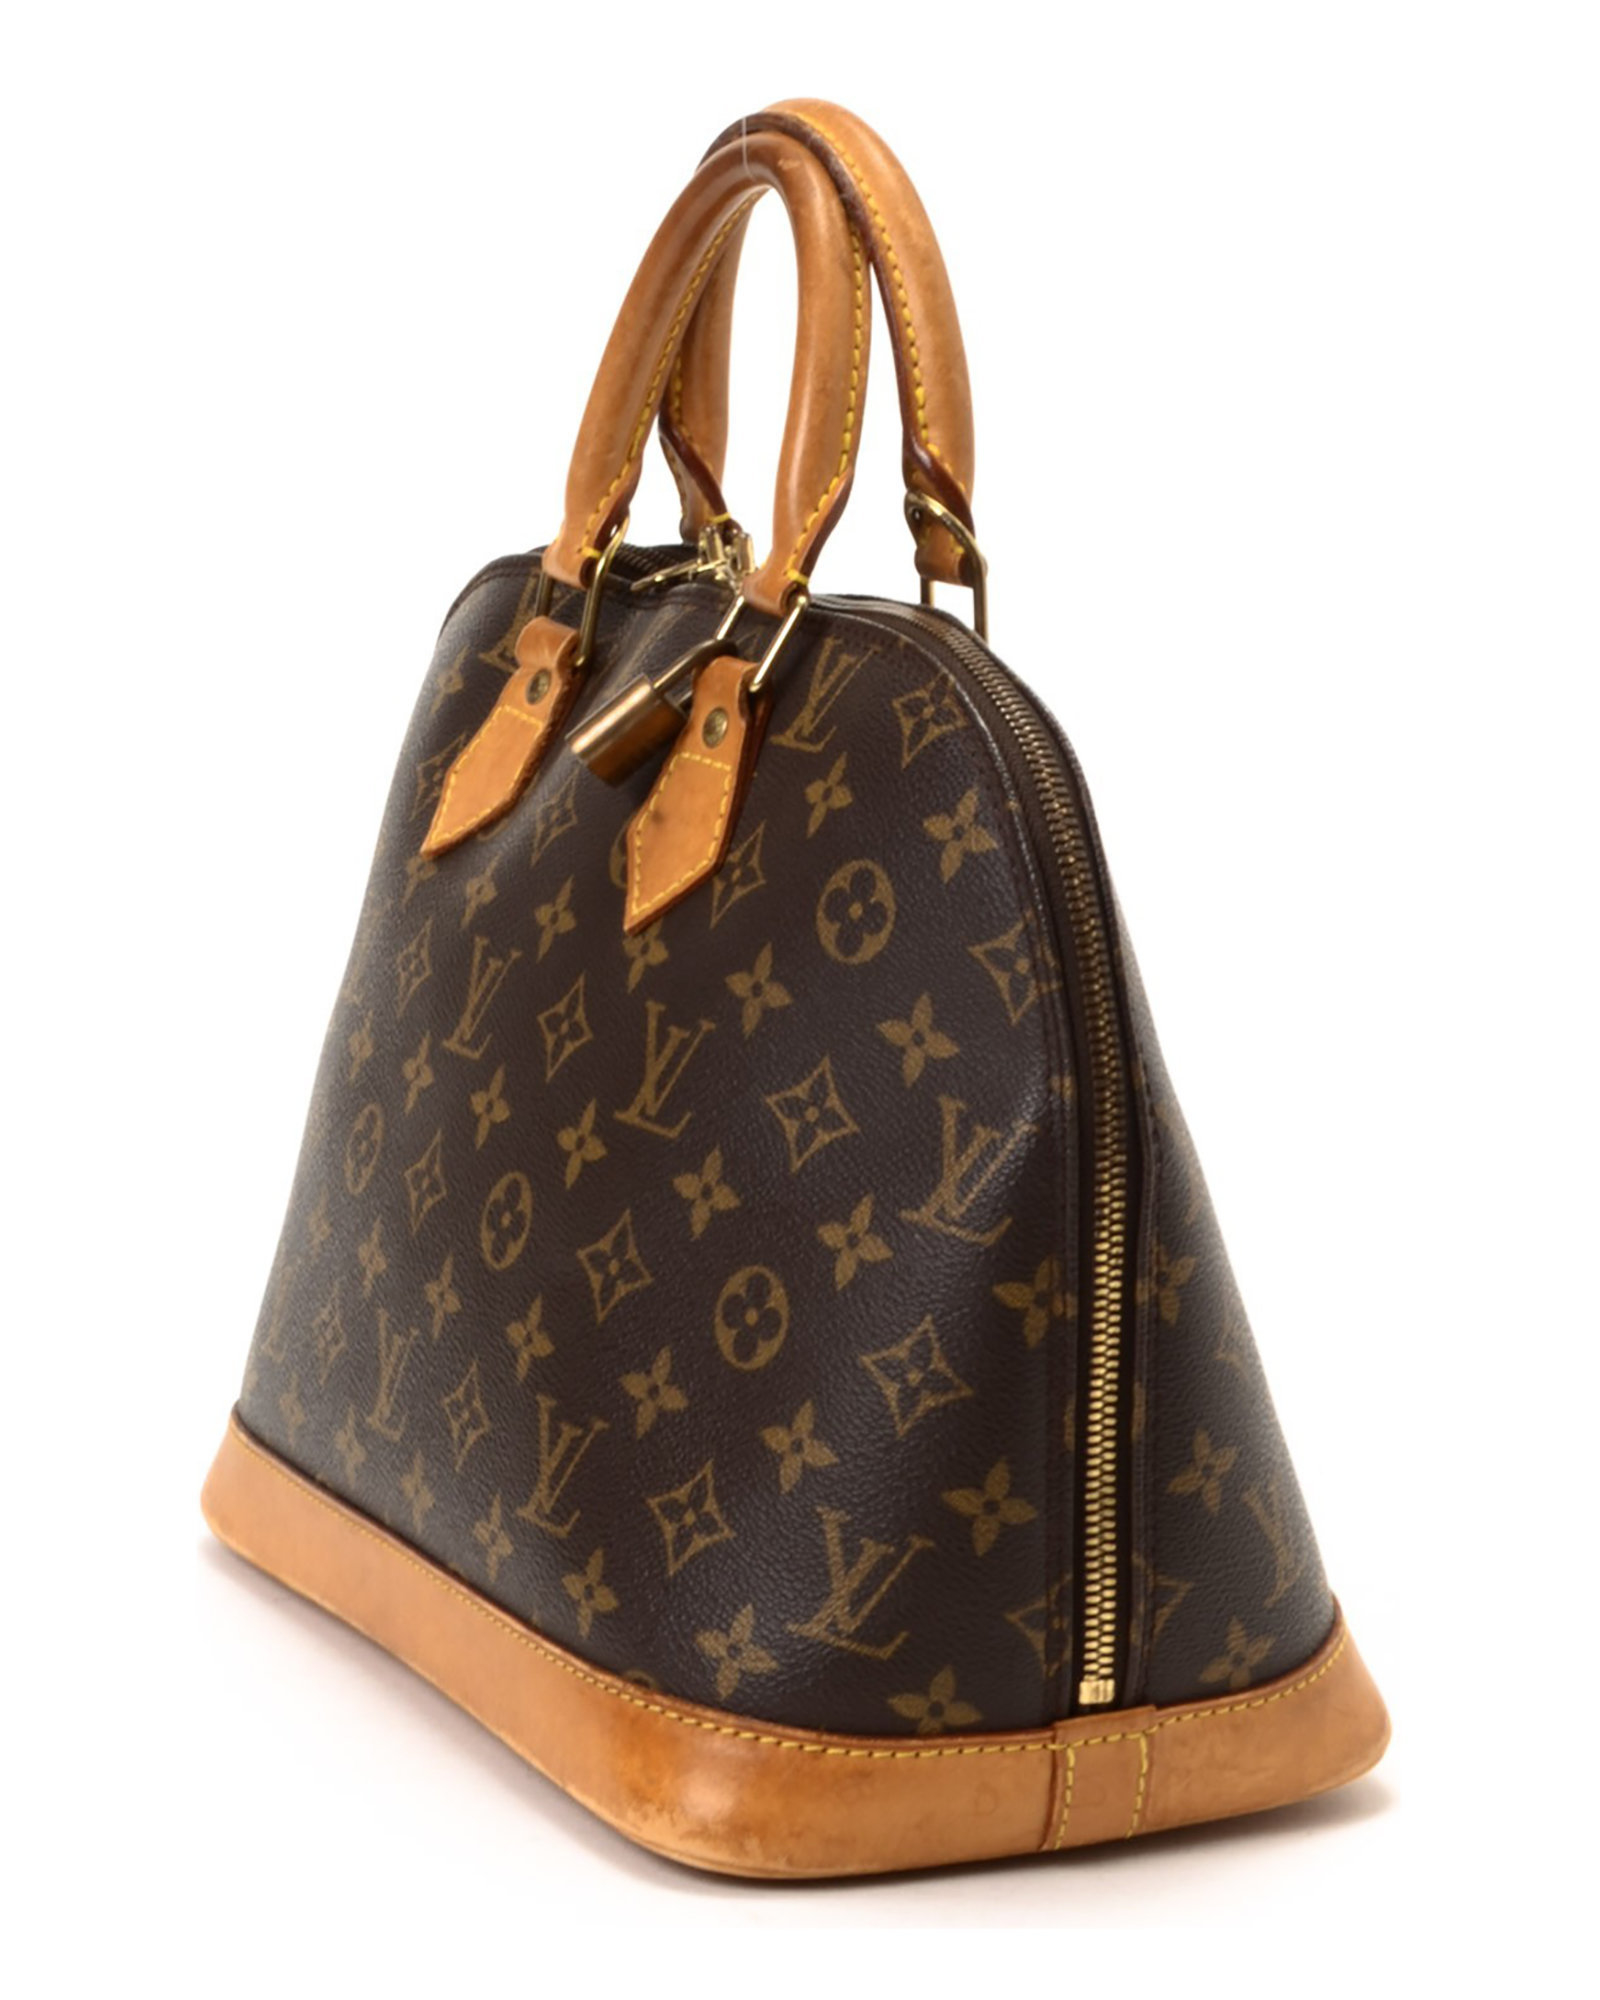 Louis Vuitton Handbags Vintage Black | Confederated Tribes of the Umatilla Indian Reservation